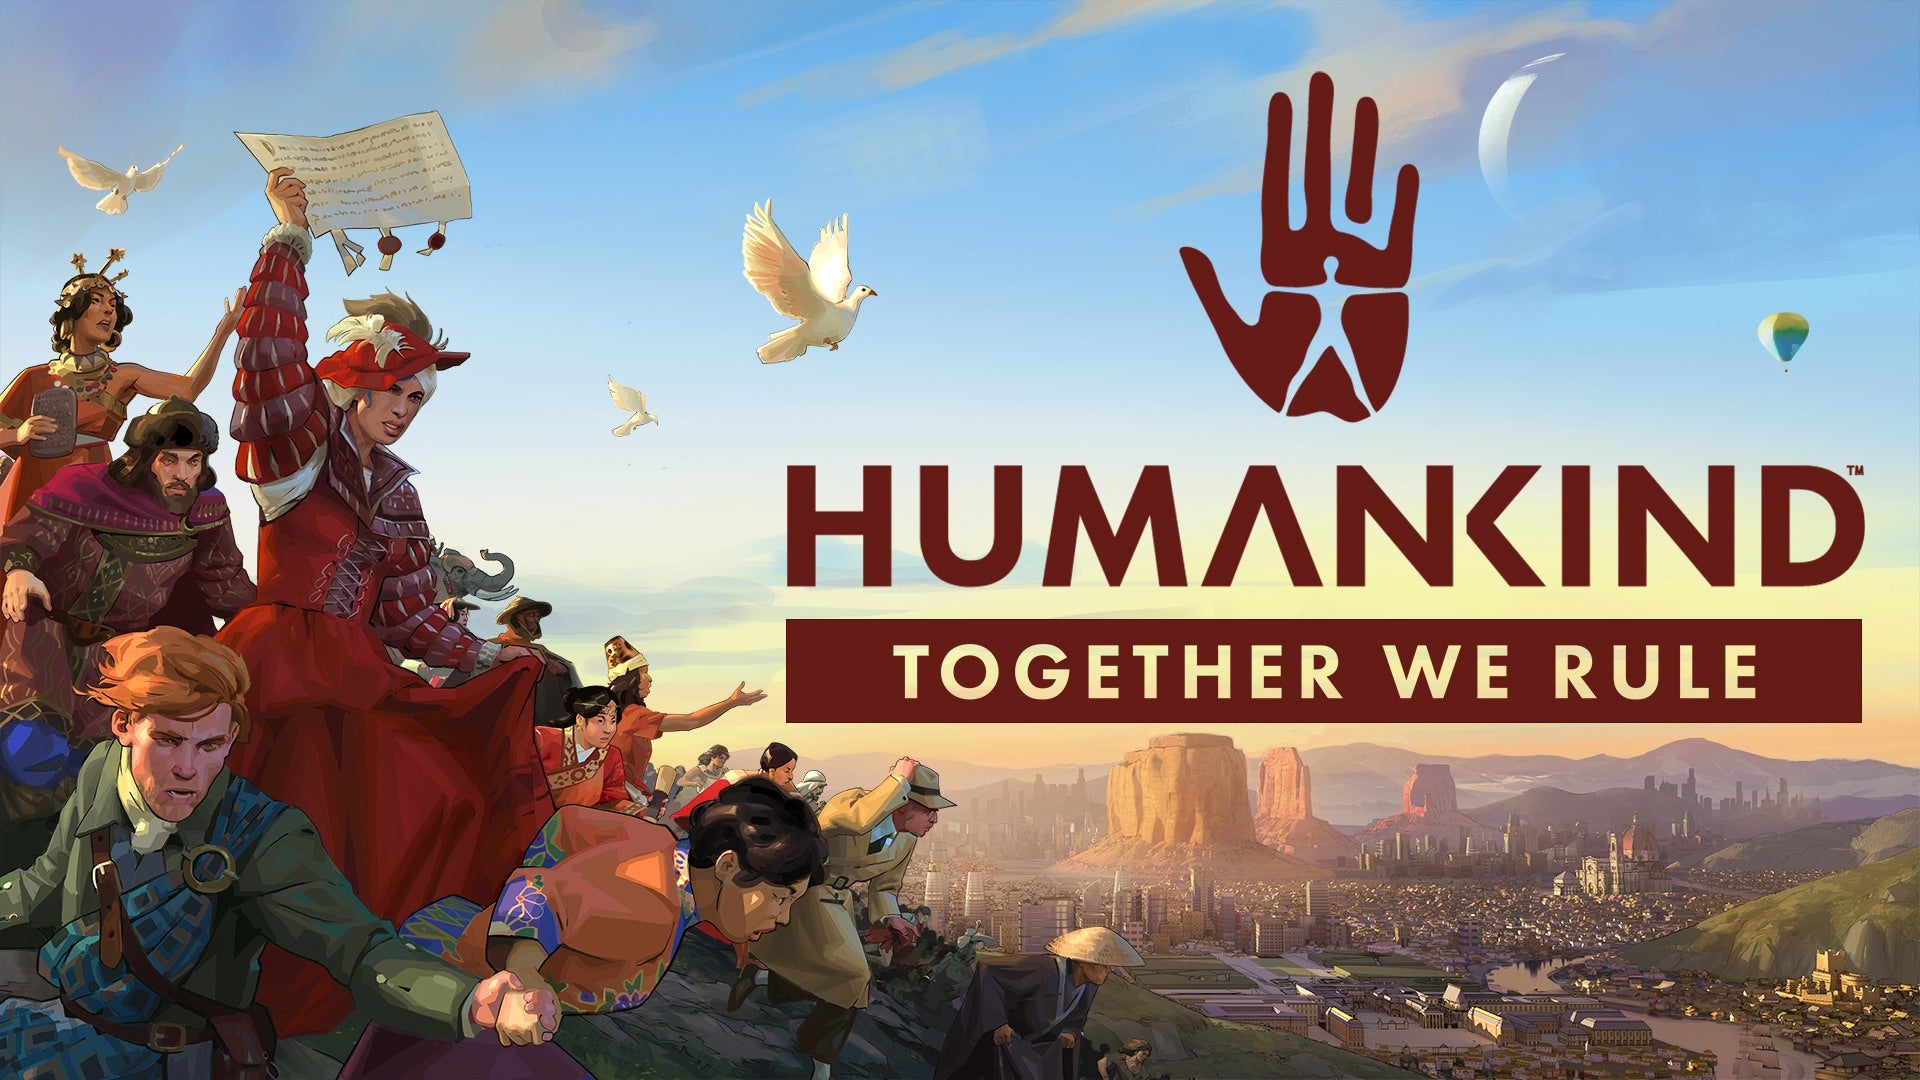 Humankind's Together We Rule expansion arrives in autumn 2022, adding six new civilizations and new diplomatic avenues.